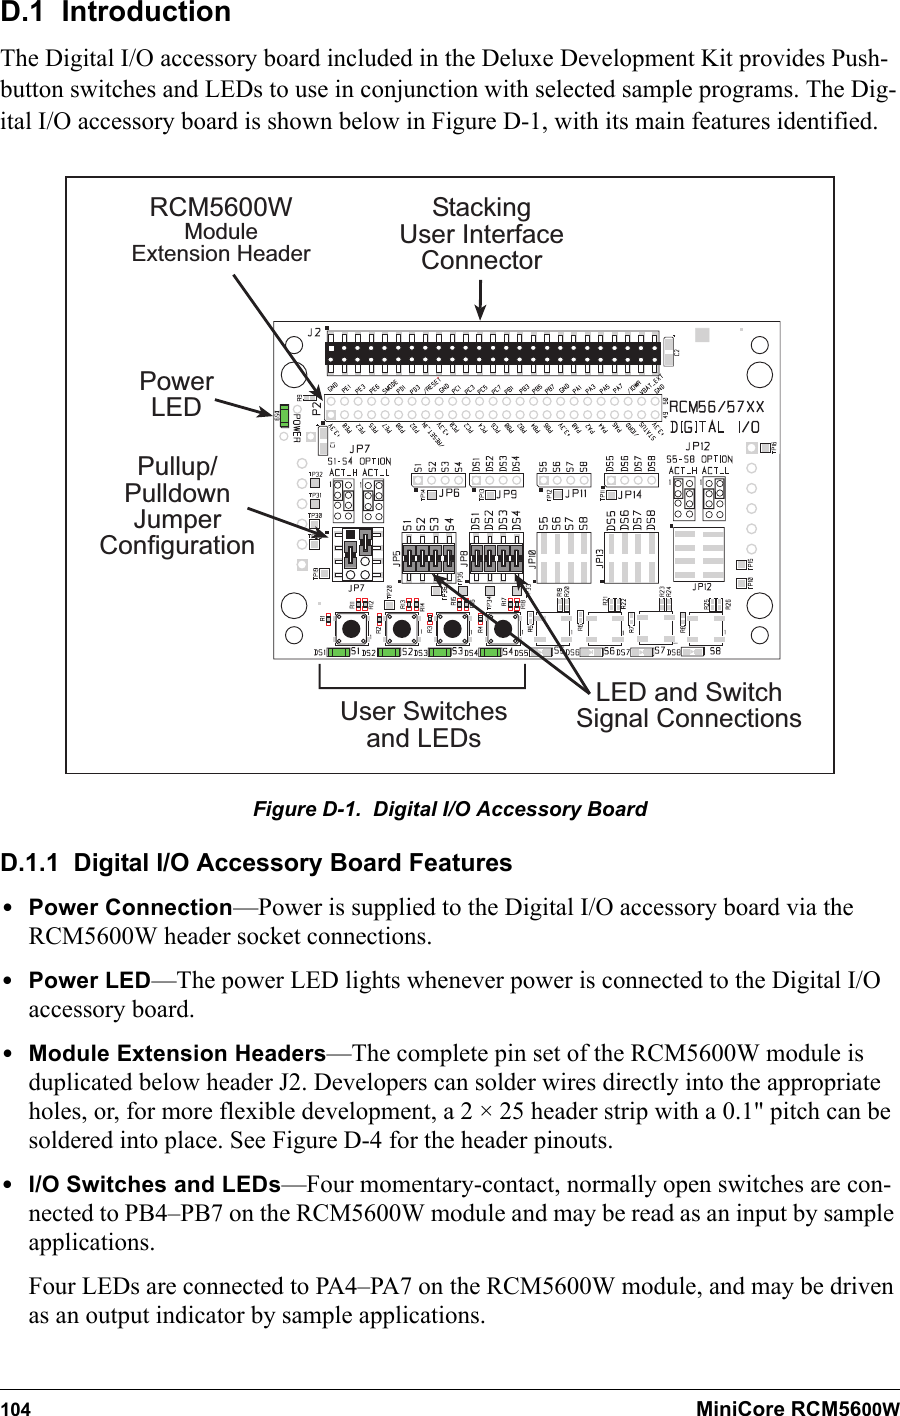 104 MiniCore RCM5600WD.1  IntroductionThe Digital I/O accessory board included in the Deluxe Development Kit provides Push-button switches and LEDs to use in conjunction with selected sample programs. The Dig-ital I/O accessory board is shown below in Figure D-1, with its main features identified.PowerLEDRCM5600WModuleExtension HeaderUser Switchesand LEDsPullup/PulldownJumperConfigurationLED and SwitchSignal ConnectionsStackingUser InterfaceConnectorFigure D-1.  Digital I/O Accessory BoardD.1.1  Digital I/O Accessory Board Features•Power Connection—Power is supplied to the Digital I/O accessory board via the RCM5600W header socket connections.•Power LED—The power LED lights whenever power is connected to the Digital I/O accessory board.•Module Extension Headers—The complete pin set of the RCM5600W module is duplicated below header J2. Developers can solder wires directly into the appropriate holes, or, for more flexible development, a 2 × 25 header strip with a 0.1&quot; pitch can be soldered into place. See Figure D-4 for the header pinouts.•I/O Switches and LEDs—Four momentary-contact, normally open switches are con-nected to PB4–PB7 on the RCM5600W module and may be read as an input by sample applications.Four LEDs are connected to PA4–PA7 on the RCM5600W module, and may be driven as an output indicator by sample applications.